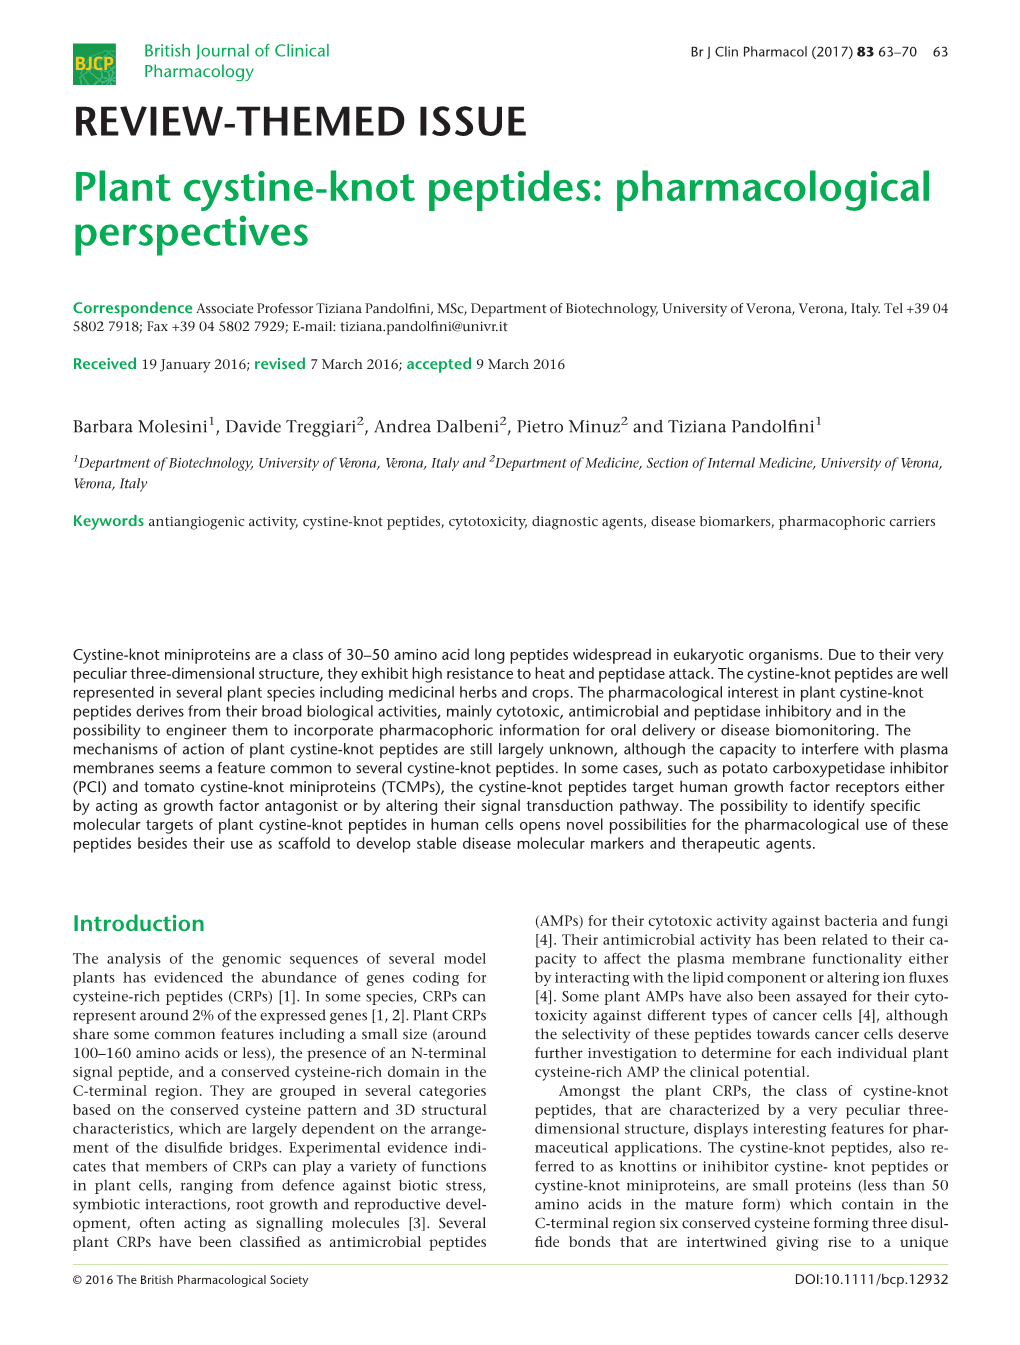 Plant Cystine-Knot Peptides: Pharmacological Perspectives